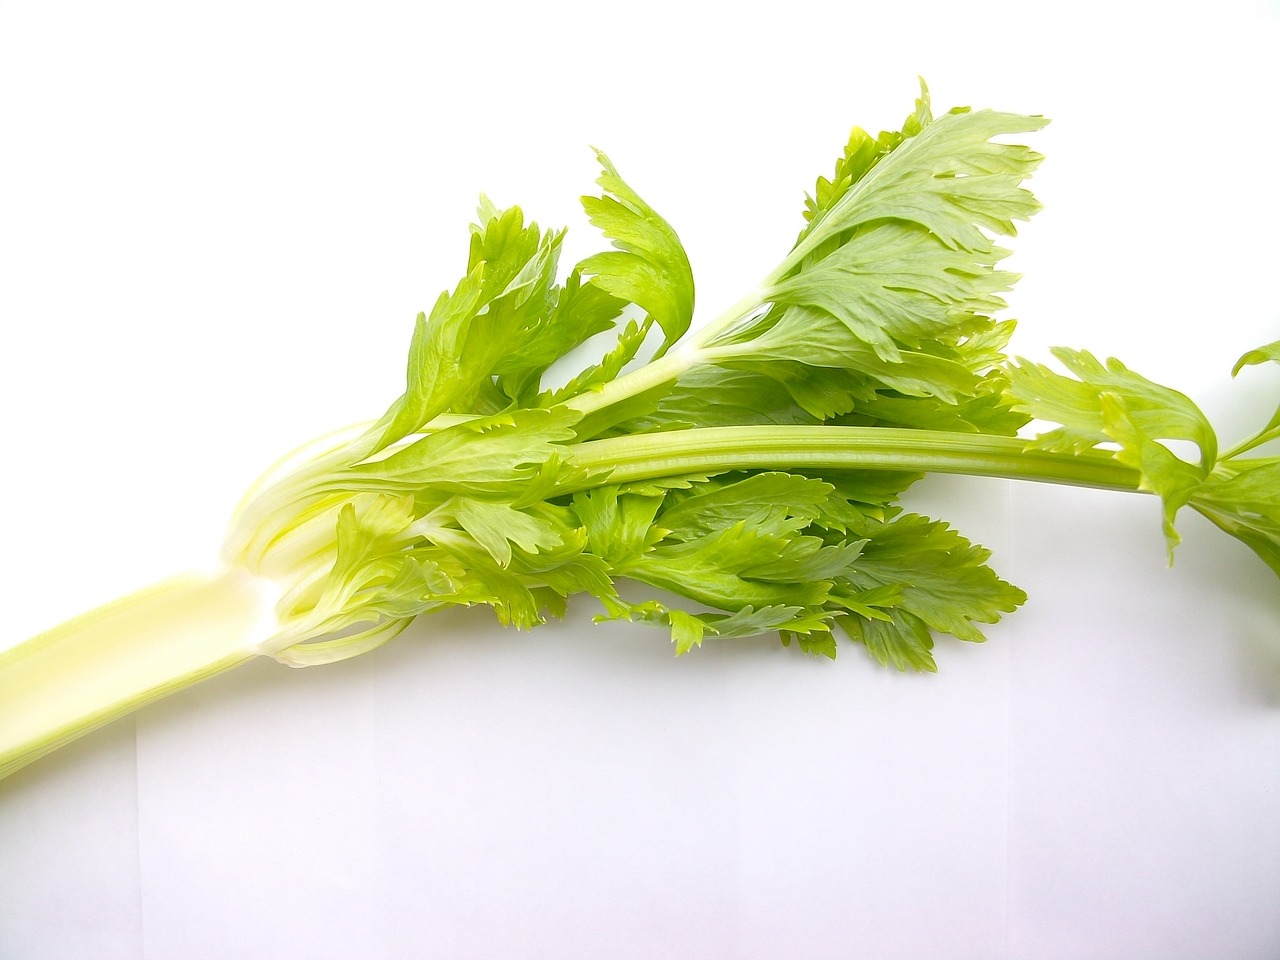 a stalk of celery on a white surface, by Tadashige Ono, hurufiyya, chrysanthemum eos-1d, product introduction photo, closeup photo, clear photo